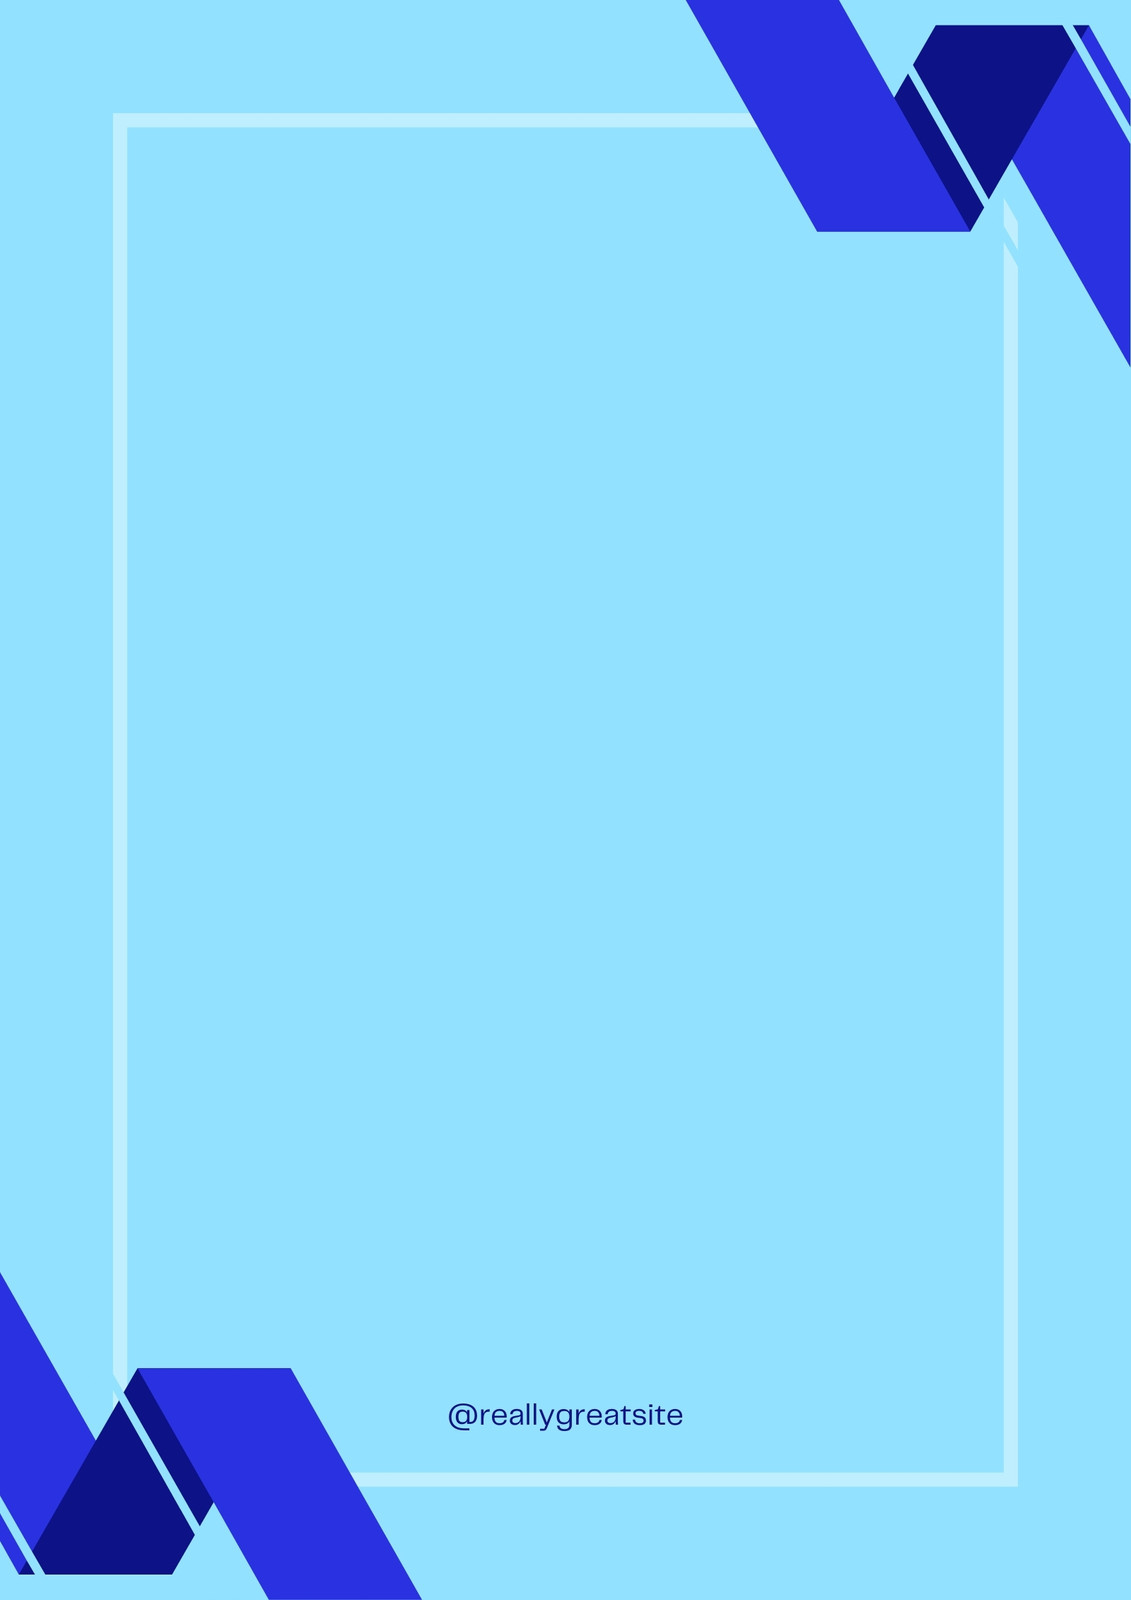 Free and customizable dark blue background templates